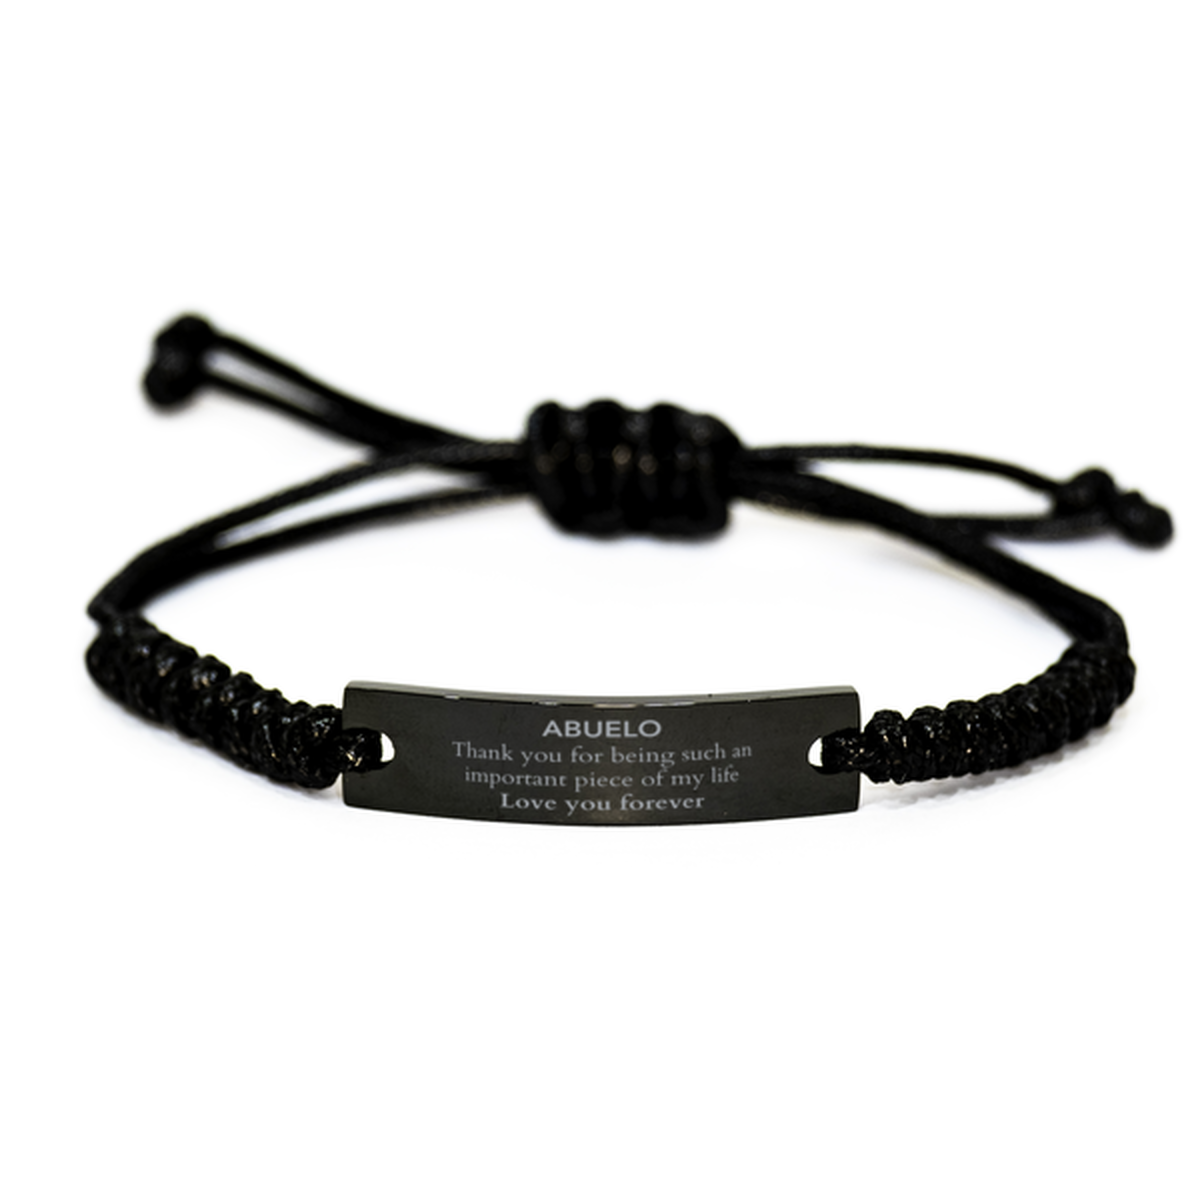 Appropriate Abuelo Black Rope Bracelet Epic Birthday Gifts for Abuelo Thank you for being such an important piece of my life Abuelo Christmas Mothers Fathers Day